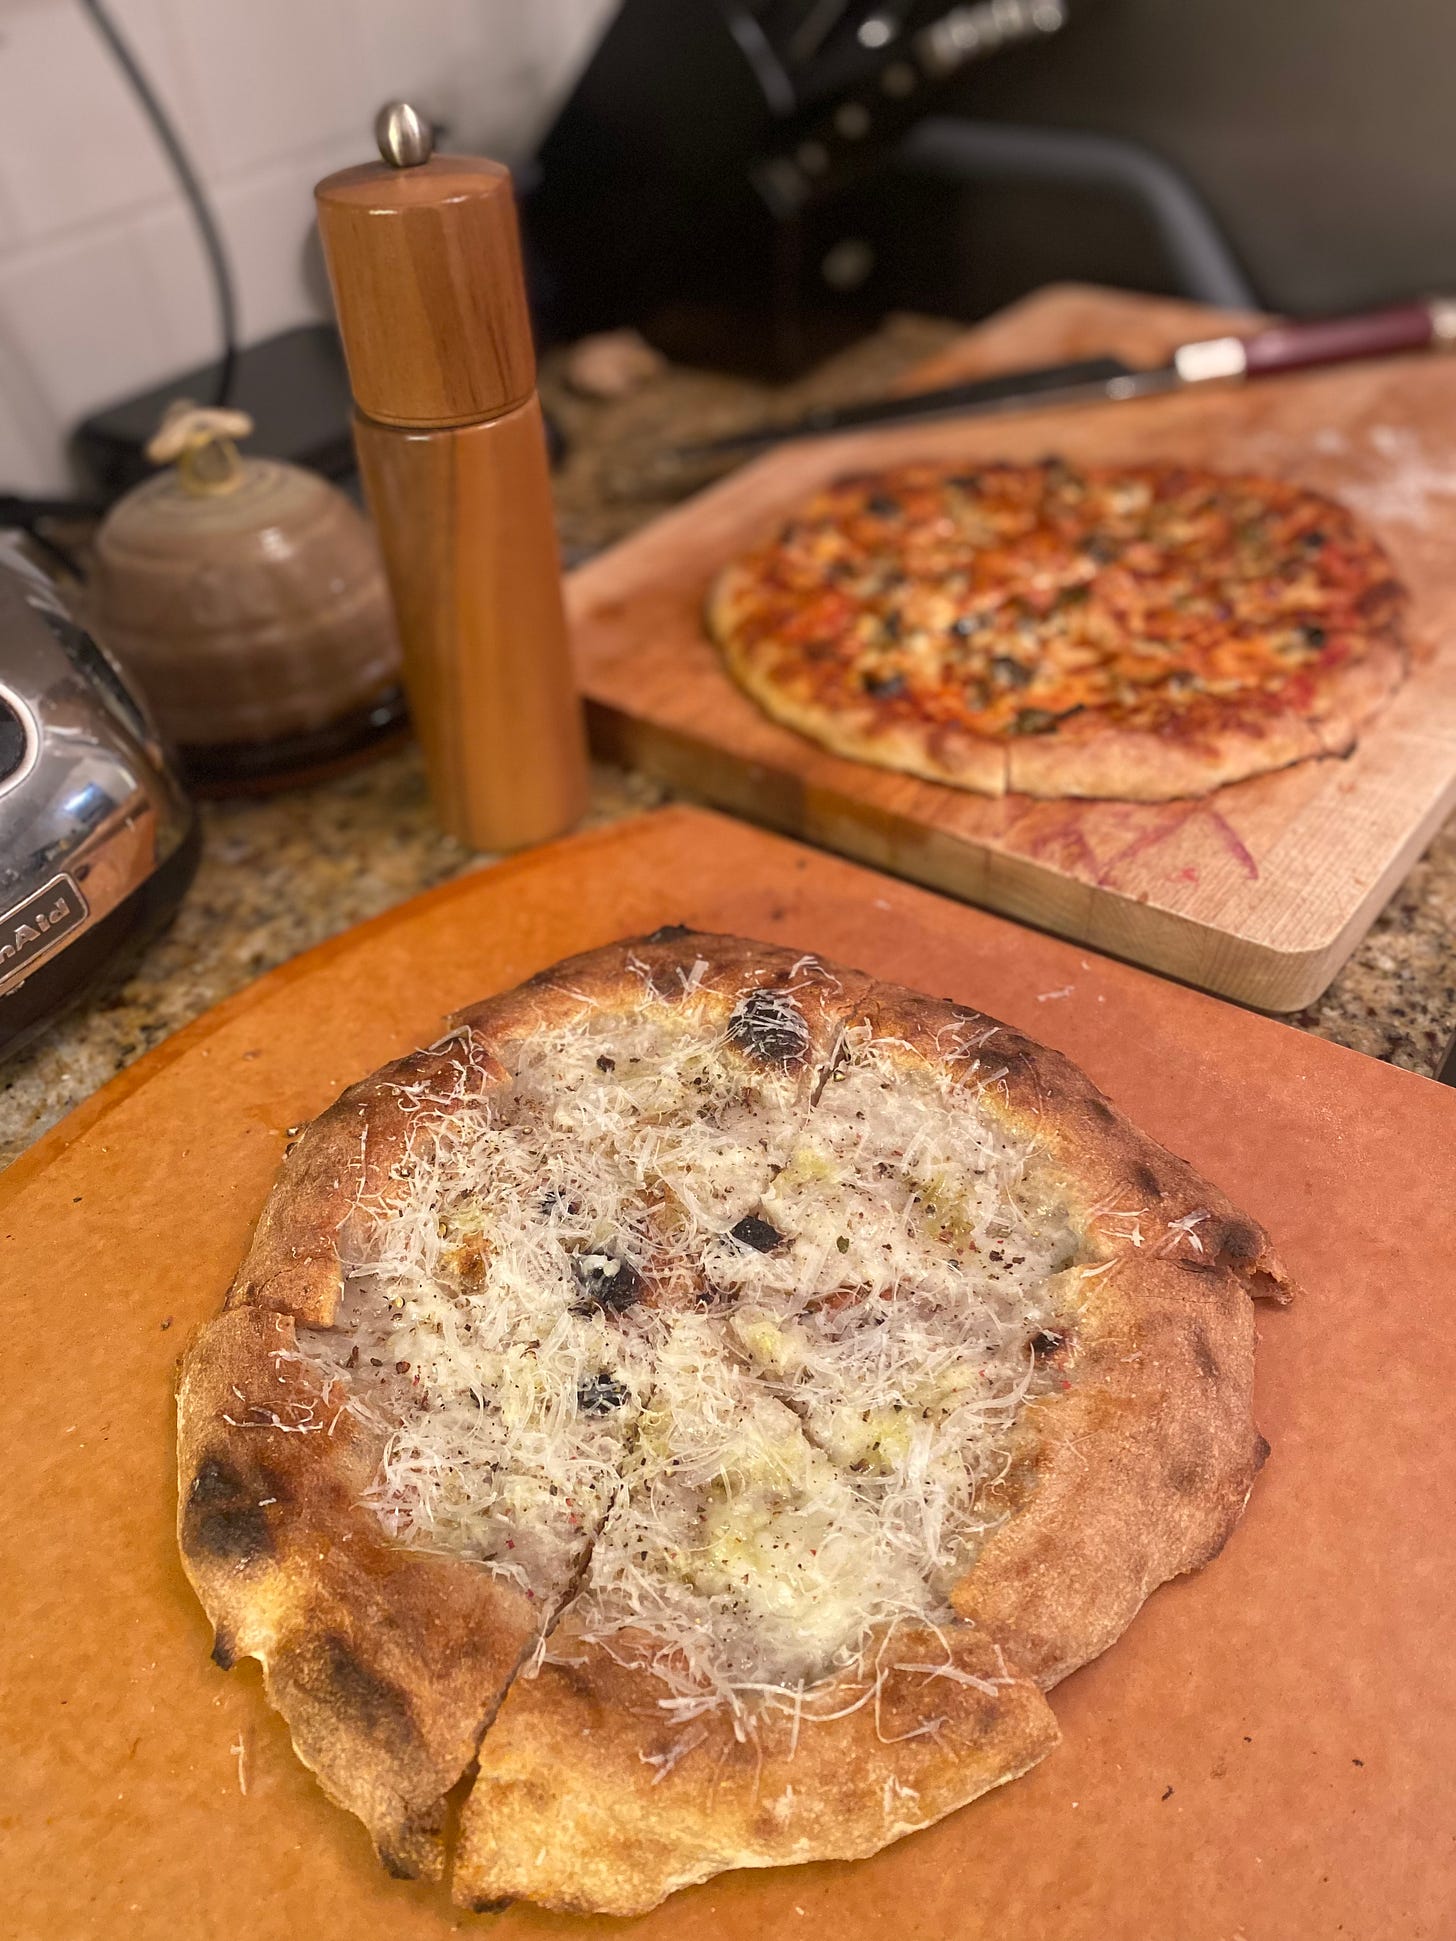 Two pizzas, one on the pizza paddle and the other on the cutting board in the background. In the background is a classic red sauce pizza with olives and mozza, and in the foreground is the cacio e pepe pizza described above. Next to it is a wood peppermill.